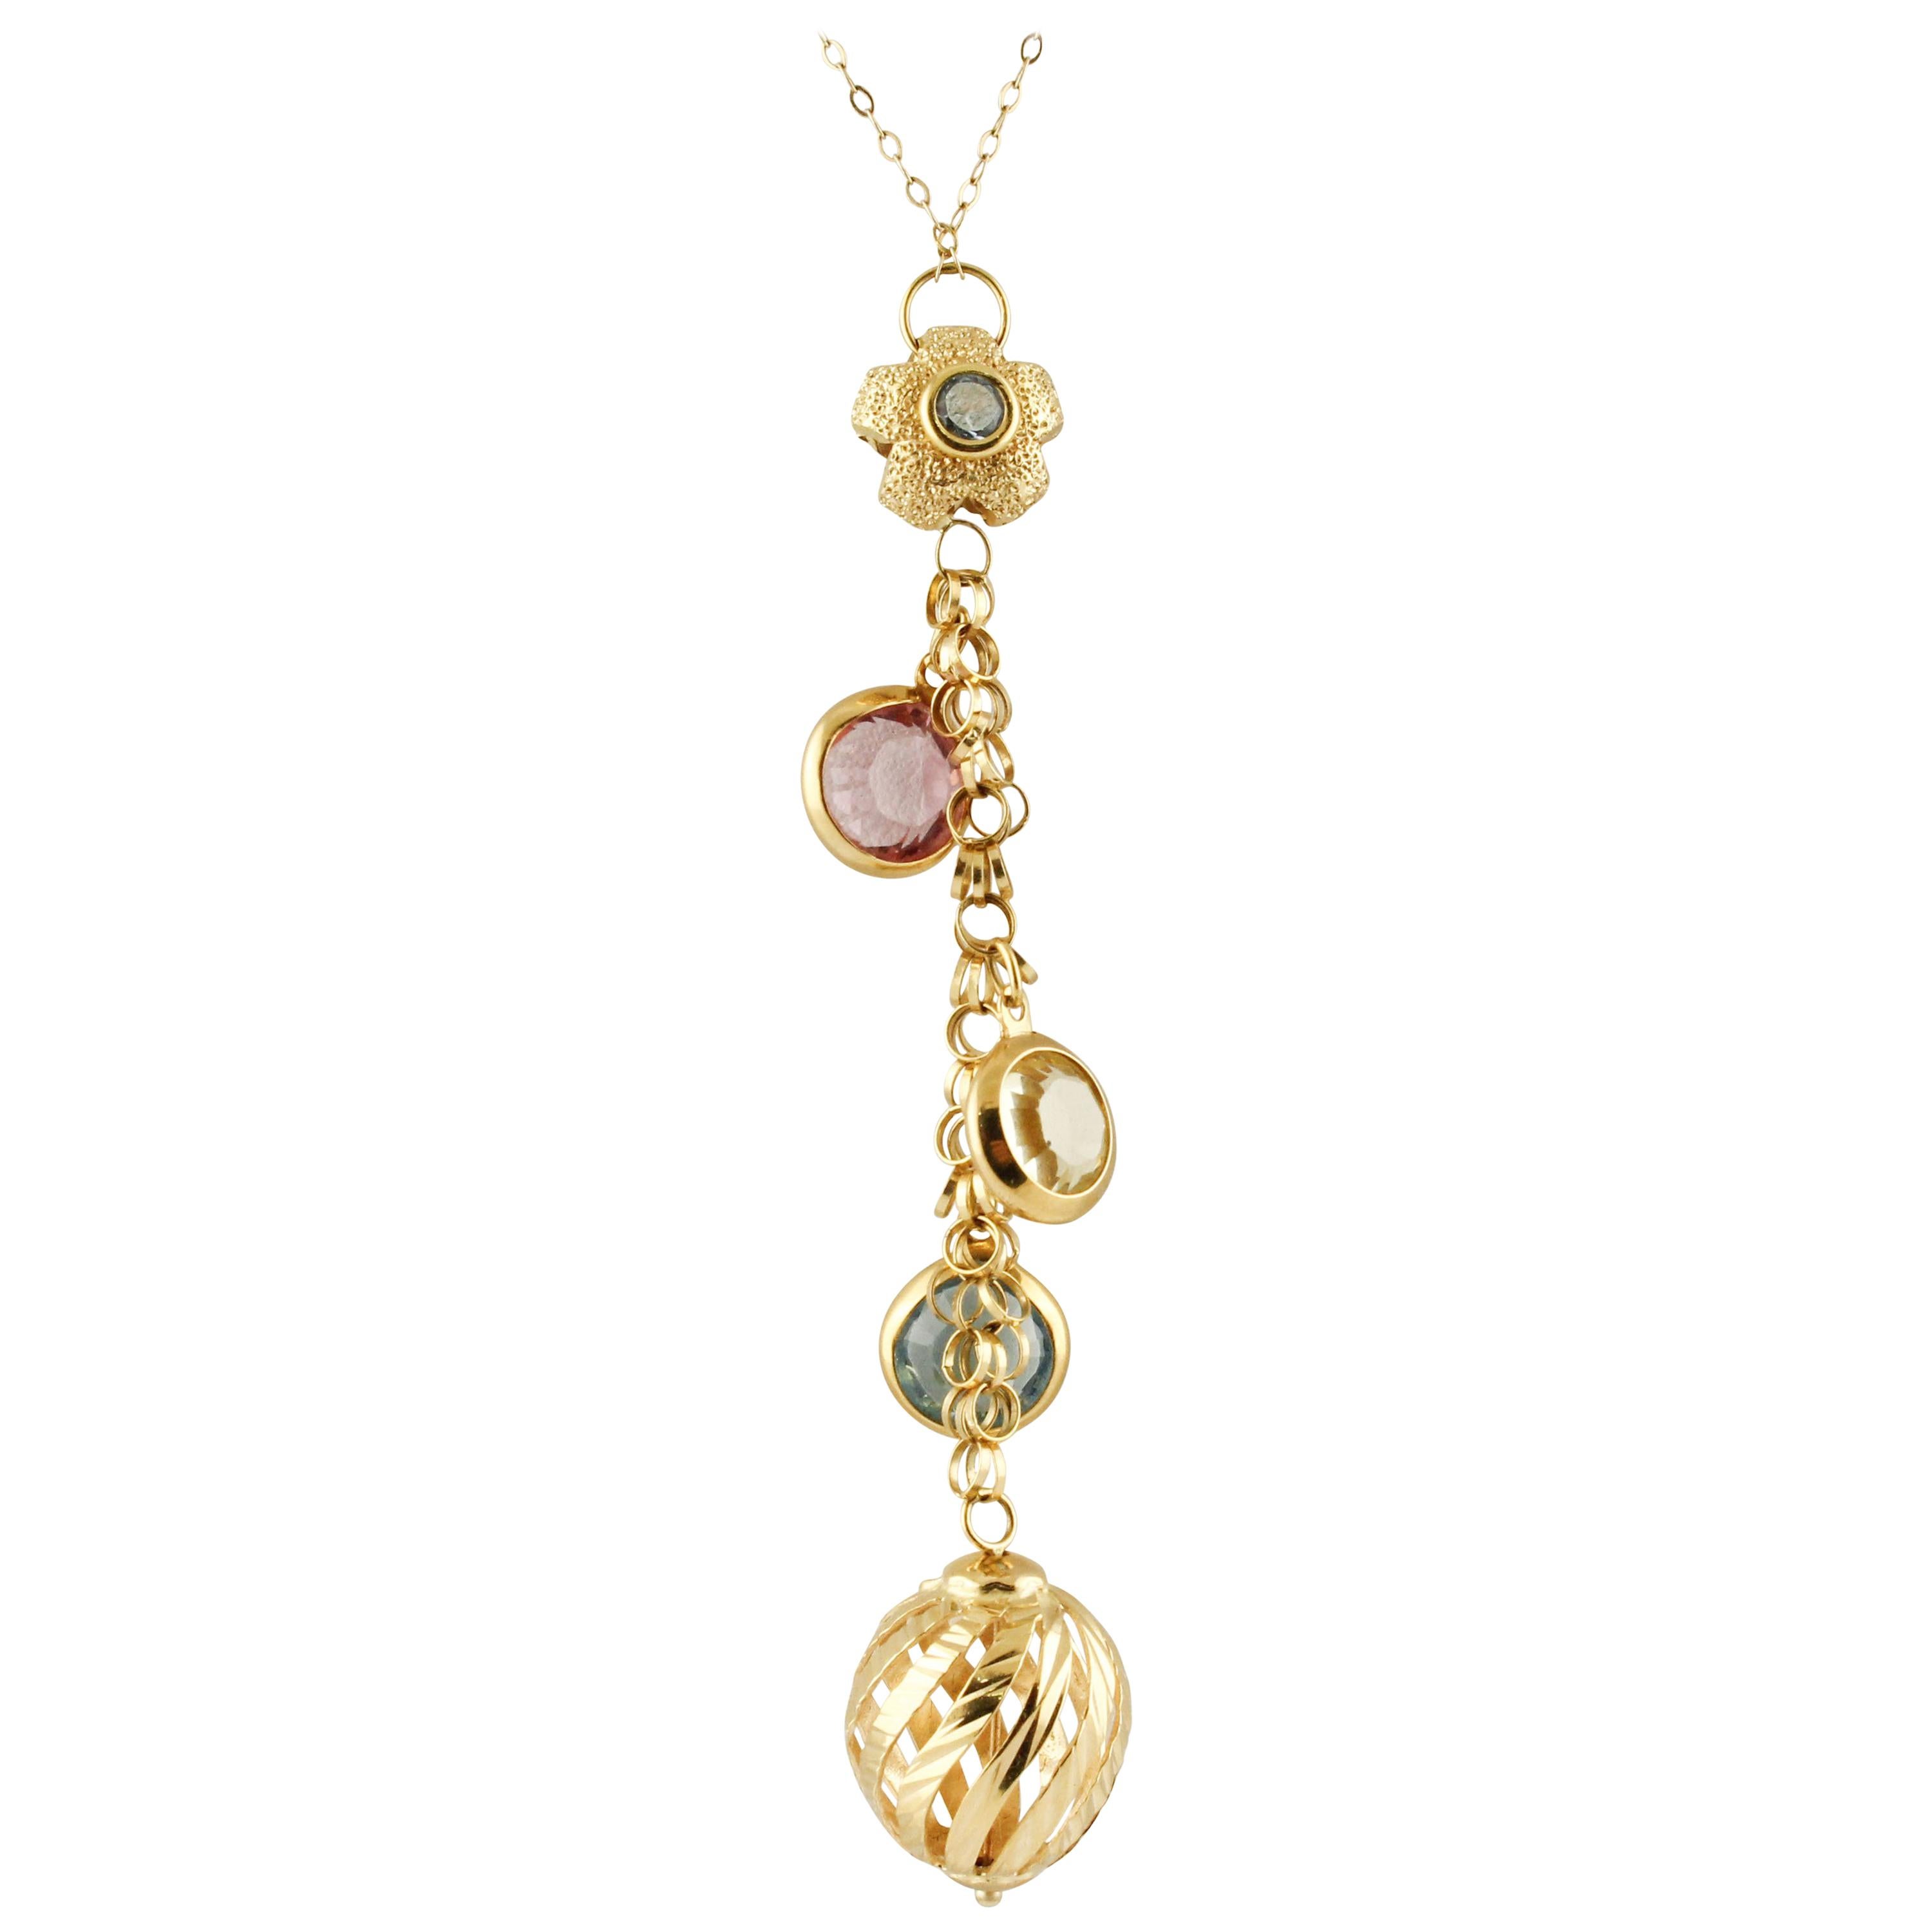 Topazs, Tourmaline, 18 Yellow Gold Pendant Necklace. For Sale